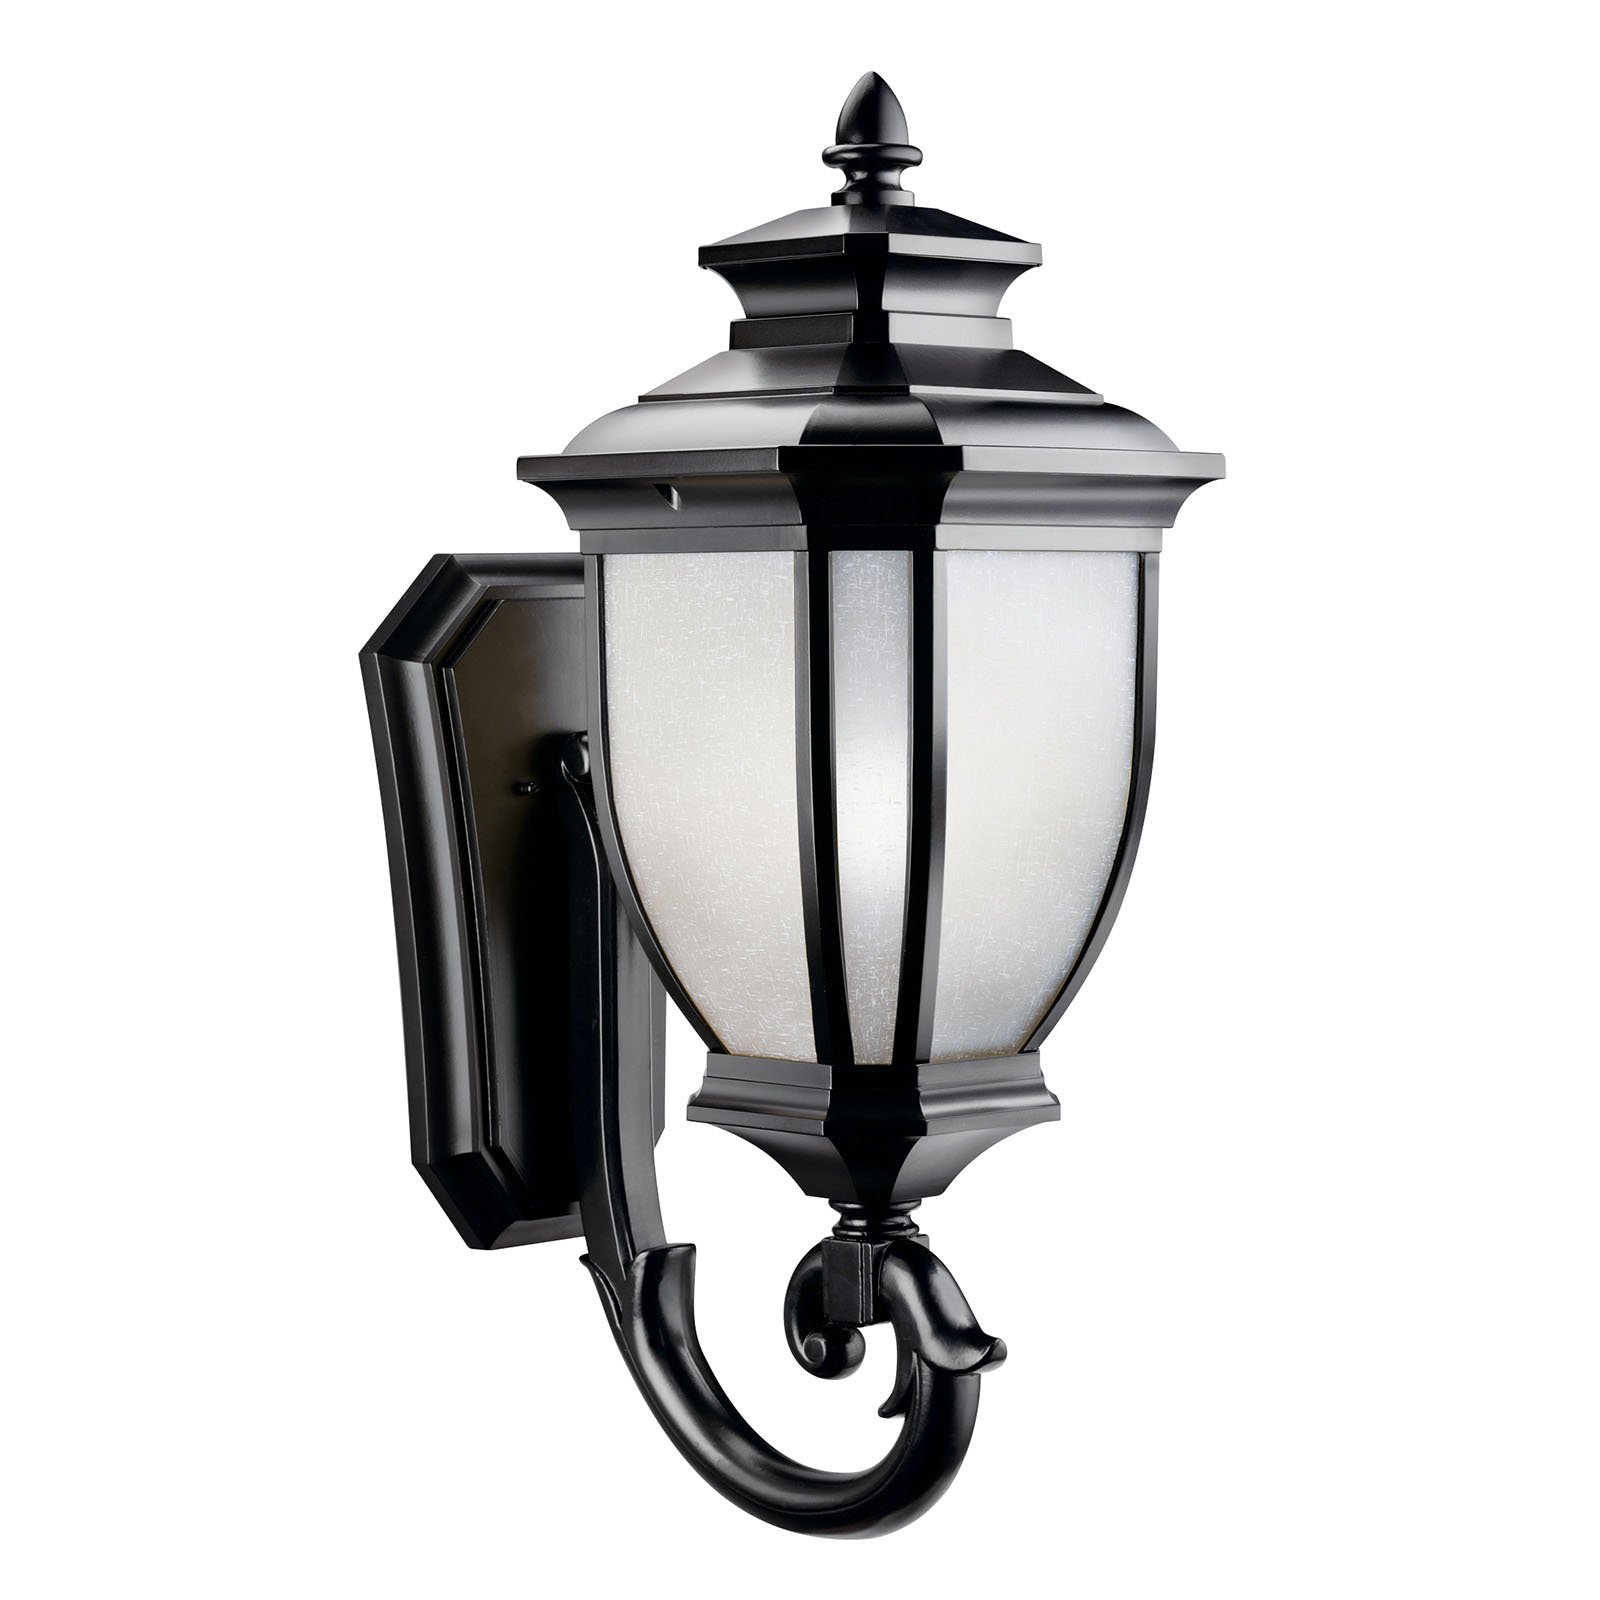 With an unmistakable British influence, this 1 light wall lantern from the elegant Salisbury(TM) collection projects timeless style for exterior spaces. Accented with a classic Black finish and White Linen Glass, this piece is as functional as it is refined .